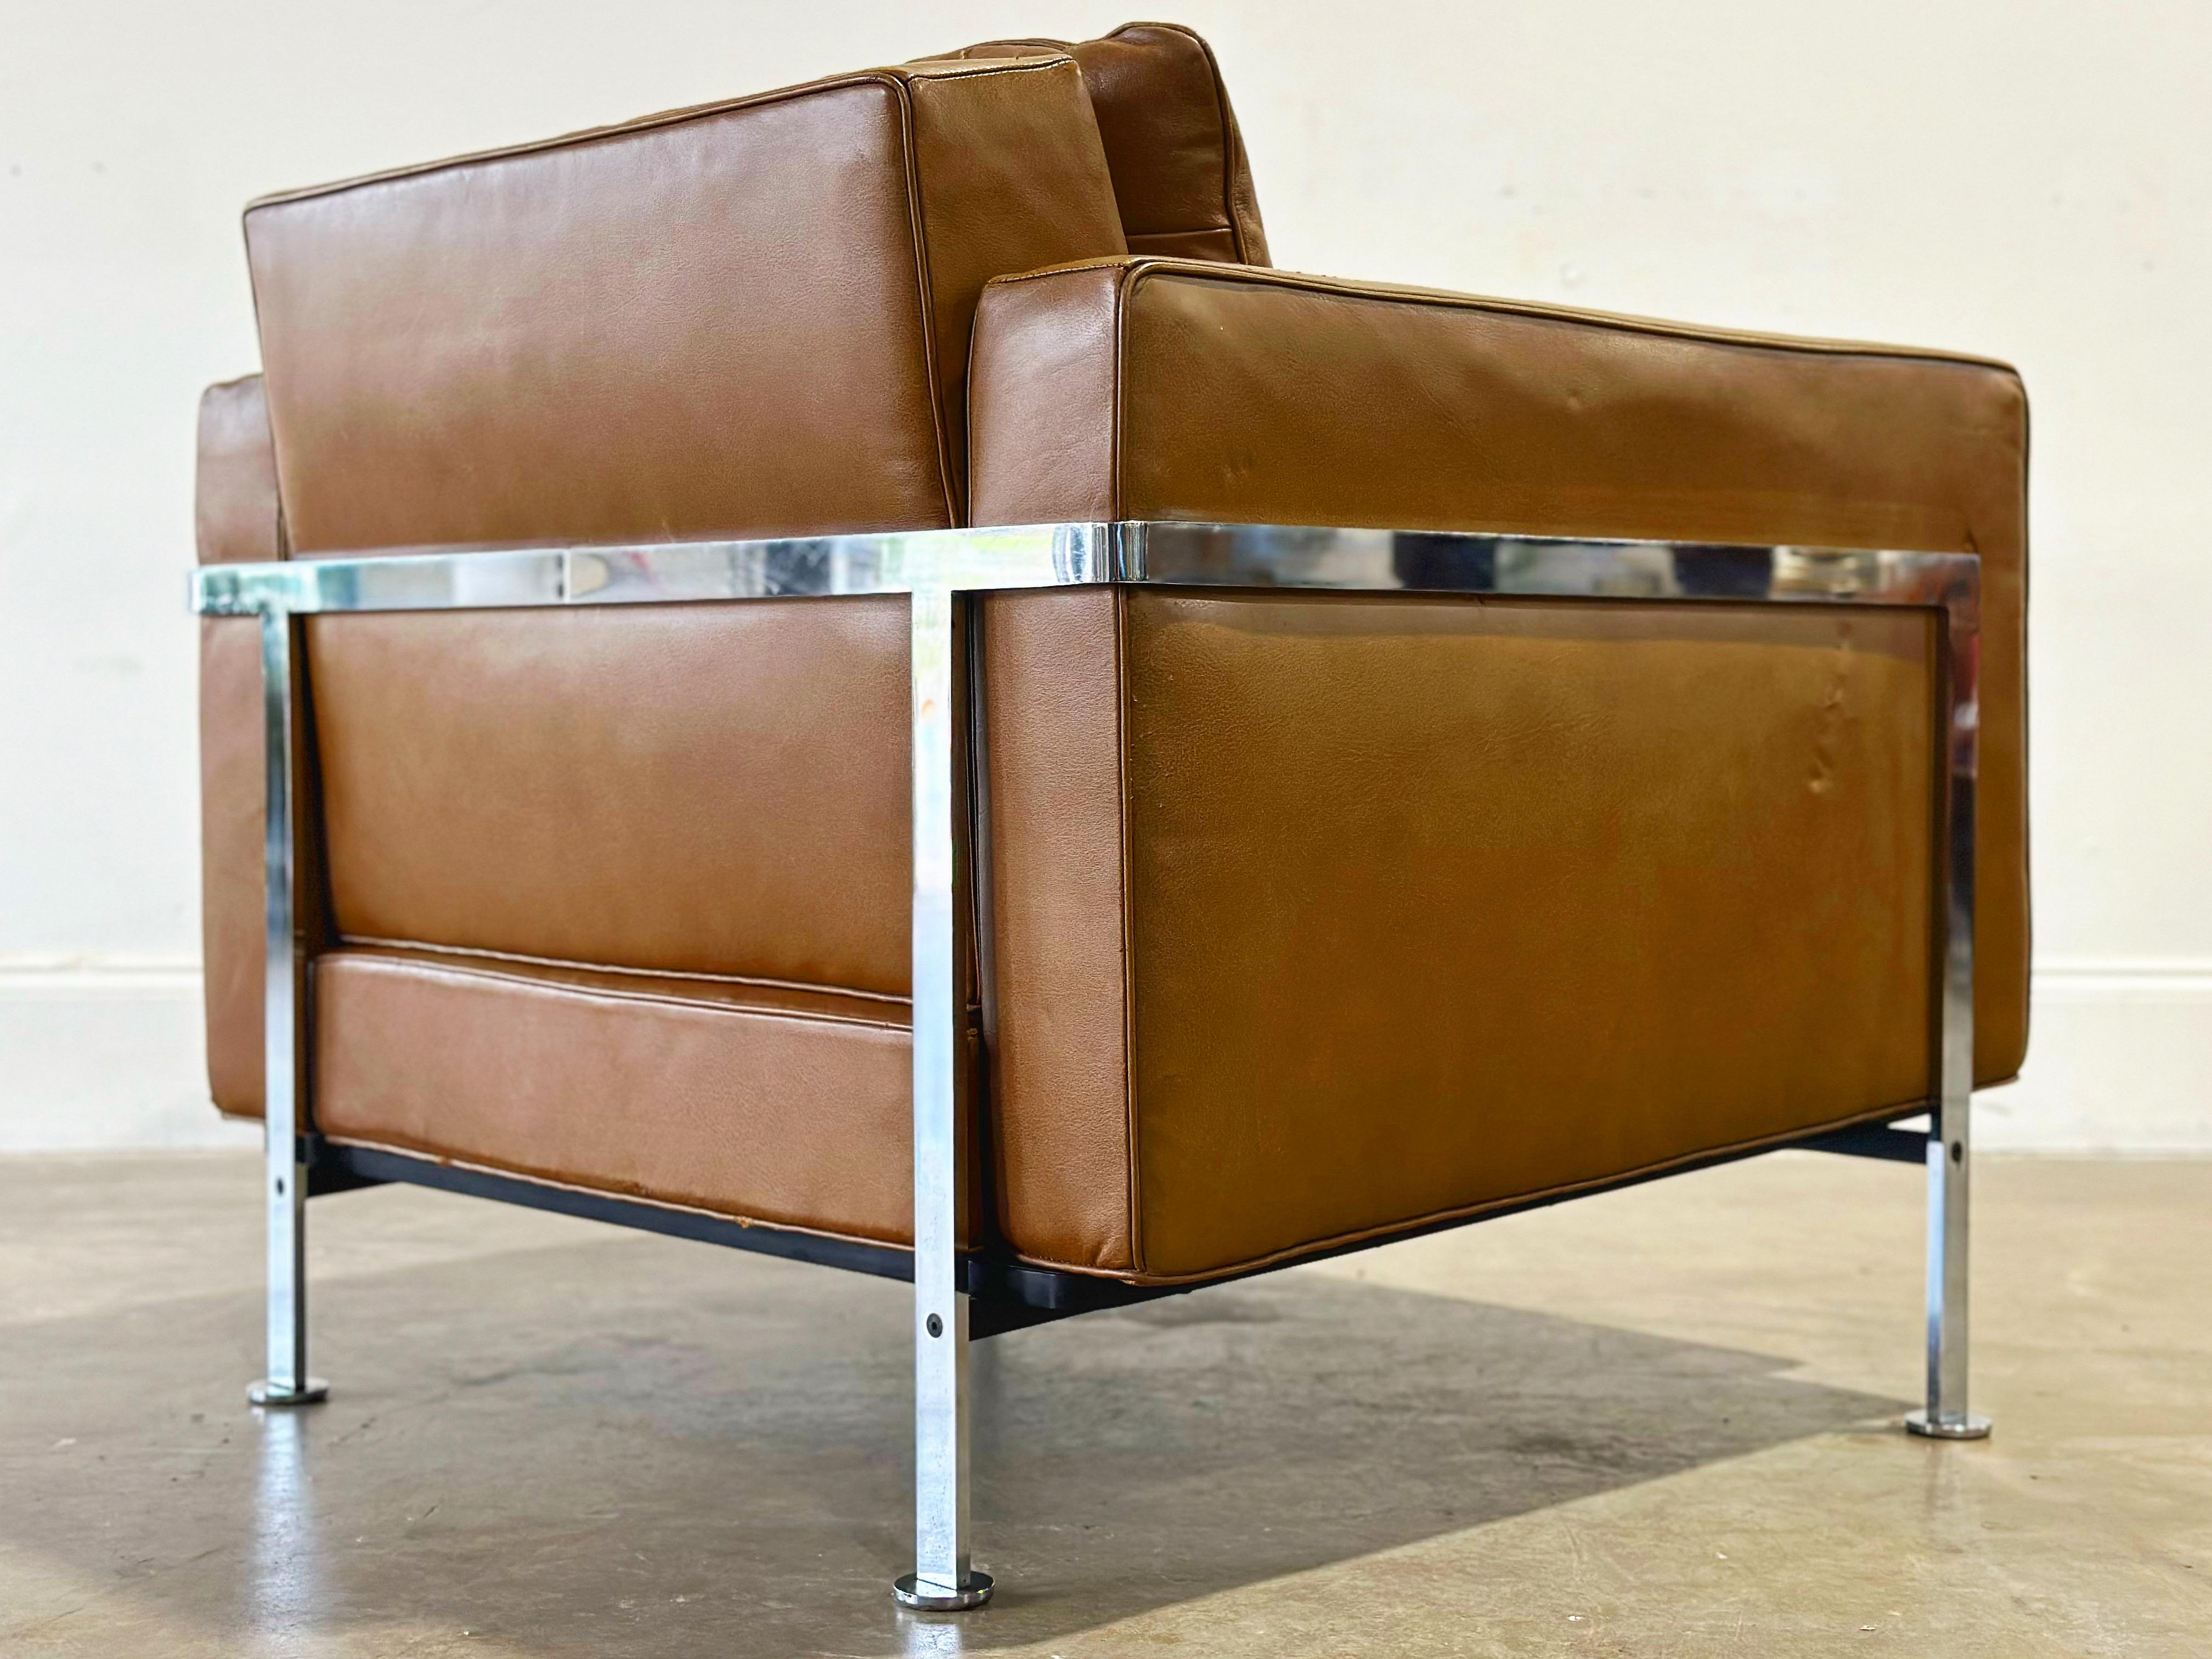 De Sede Robert Haussmann Model RH 302 Lounge Arm Chair, Leather + Chrome In Good Condition For Sale In Decatur, GA